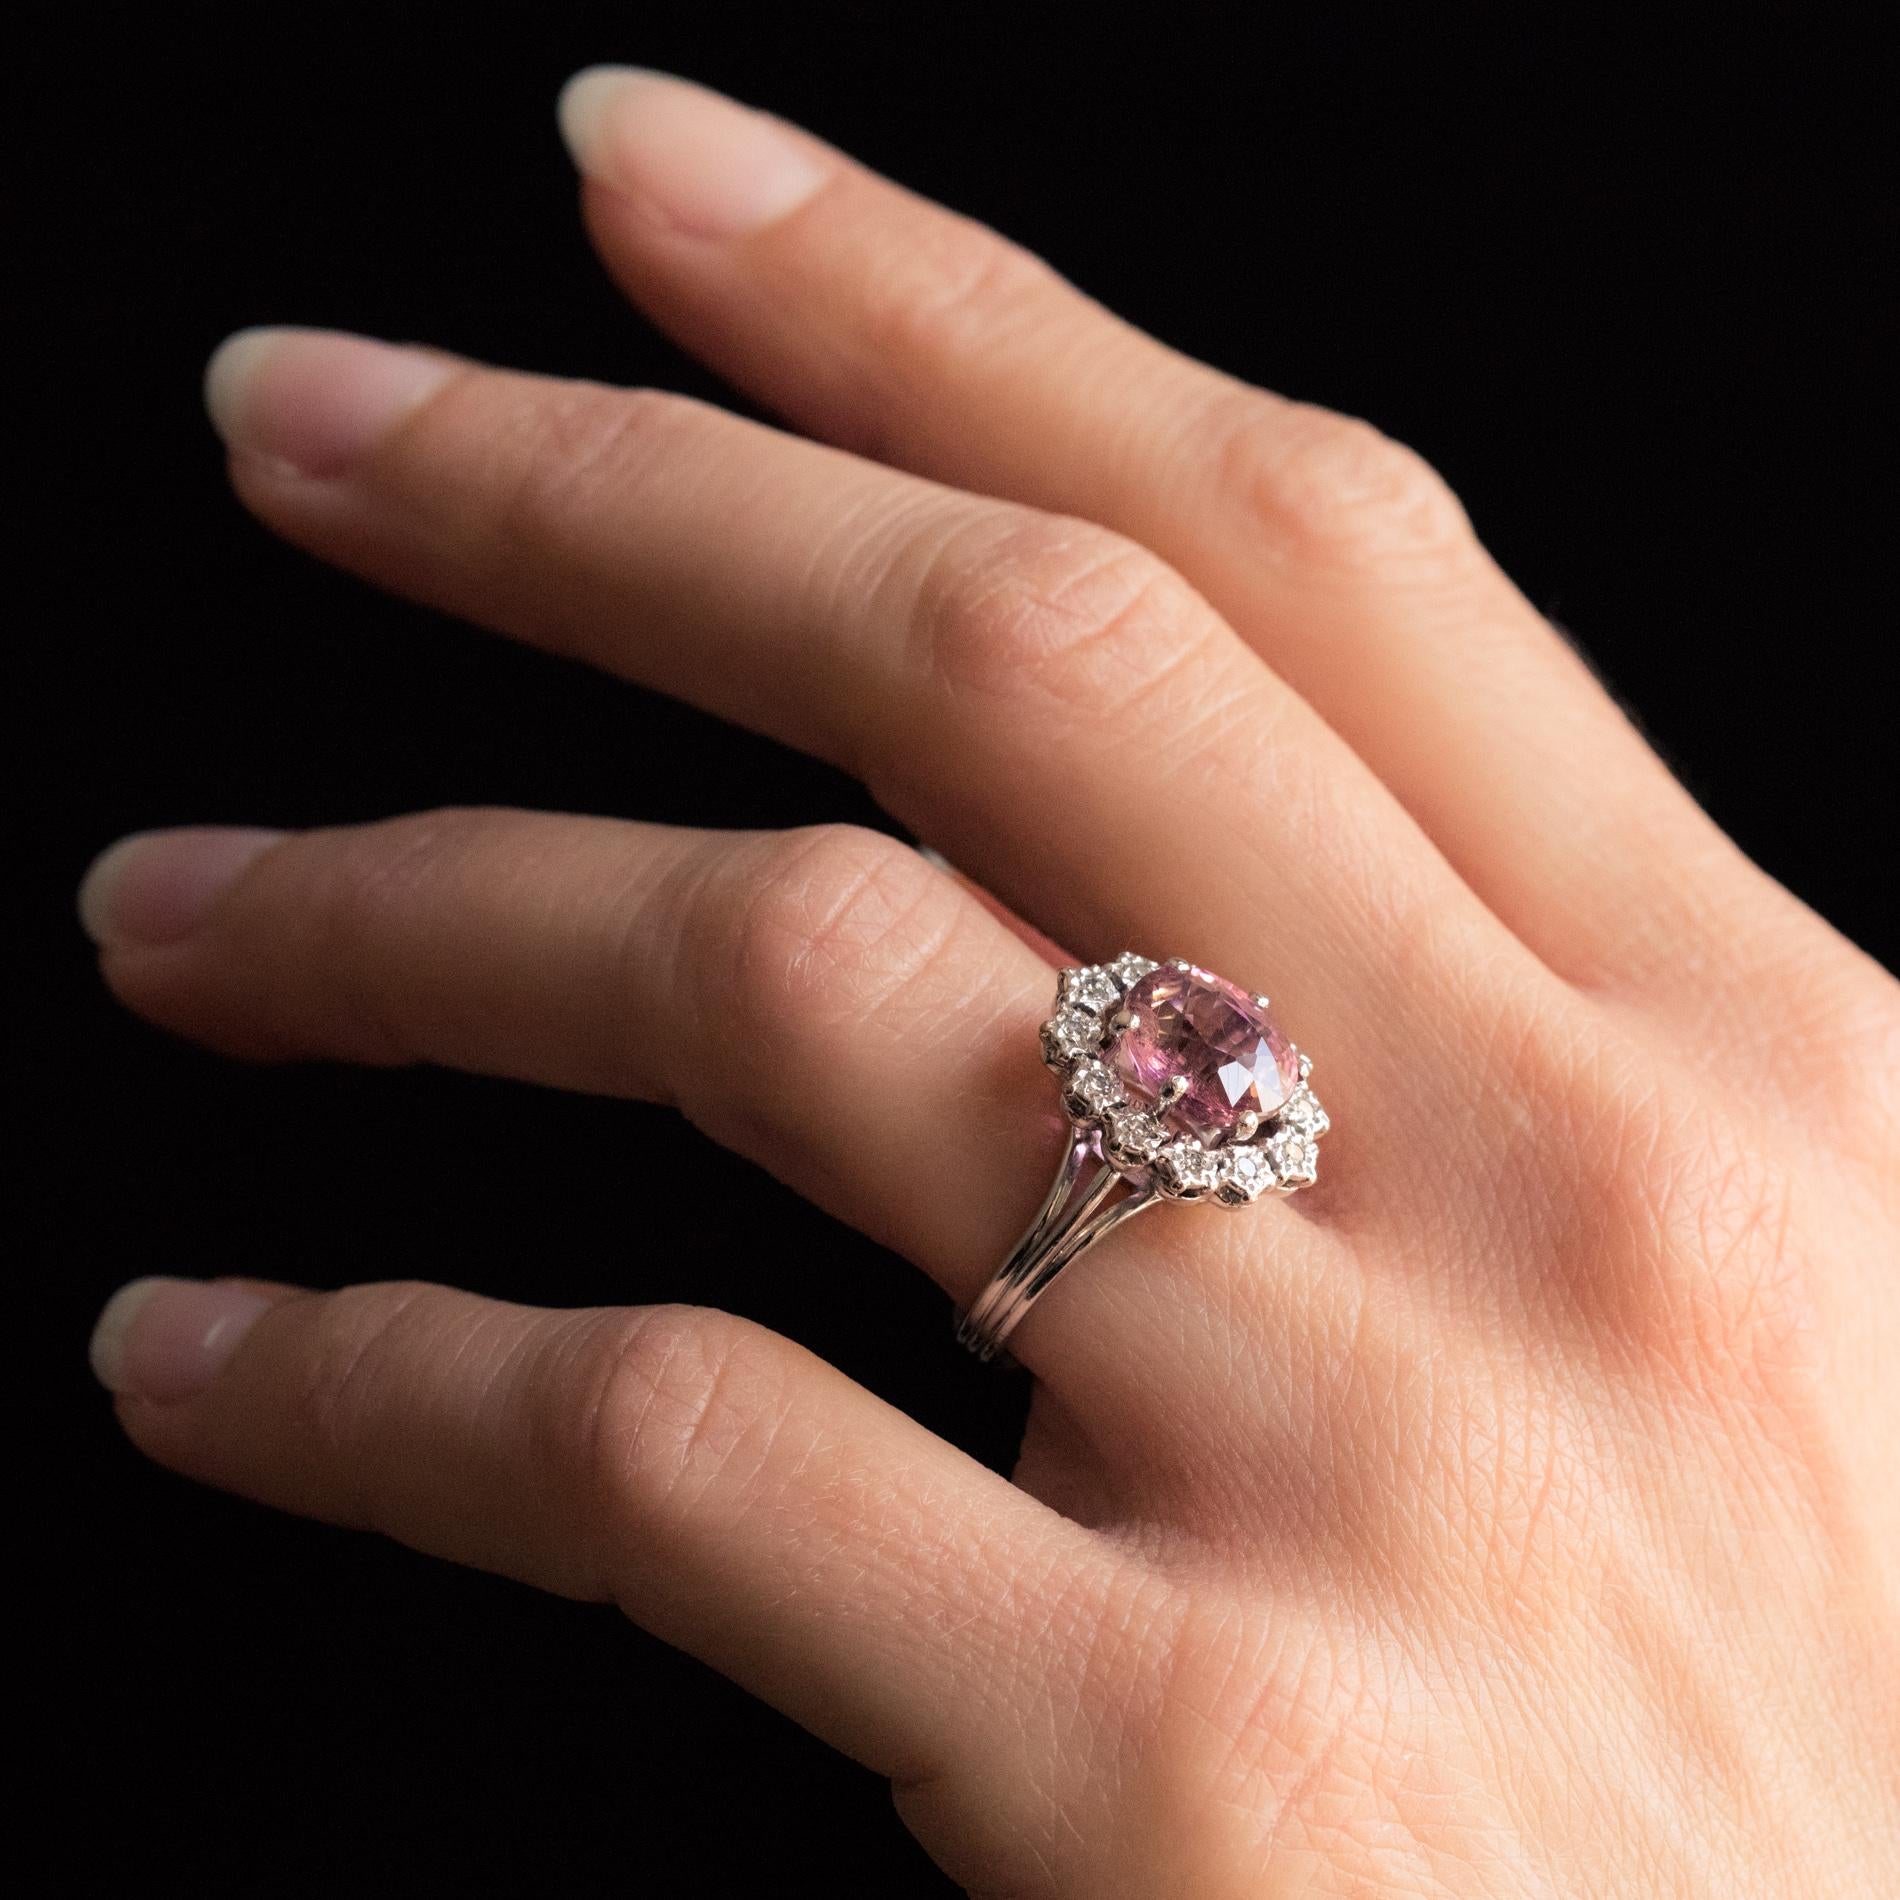 Ring in 18 karat white gold, eagle's head hallmark.
Lovely retro ring in white gold, it is adorned with a pink tourmaline set with 6 claws, surrounded by 8/8 size diamonds set in flower settings. The mounting is openwork and the ring formed of 3